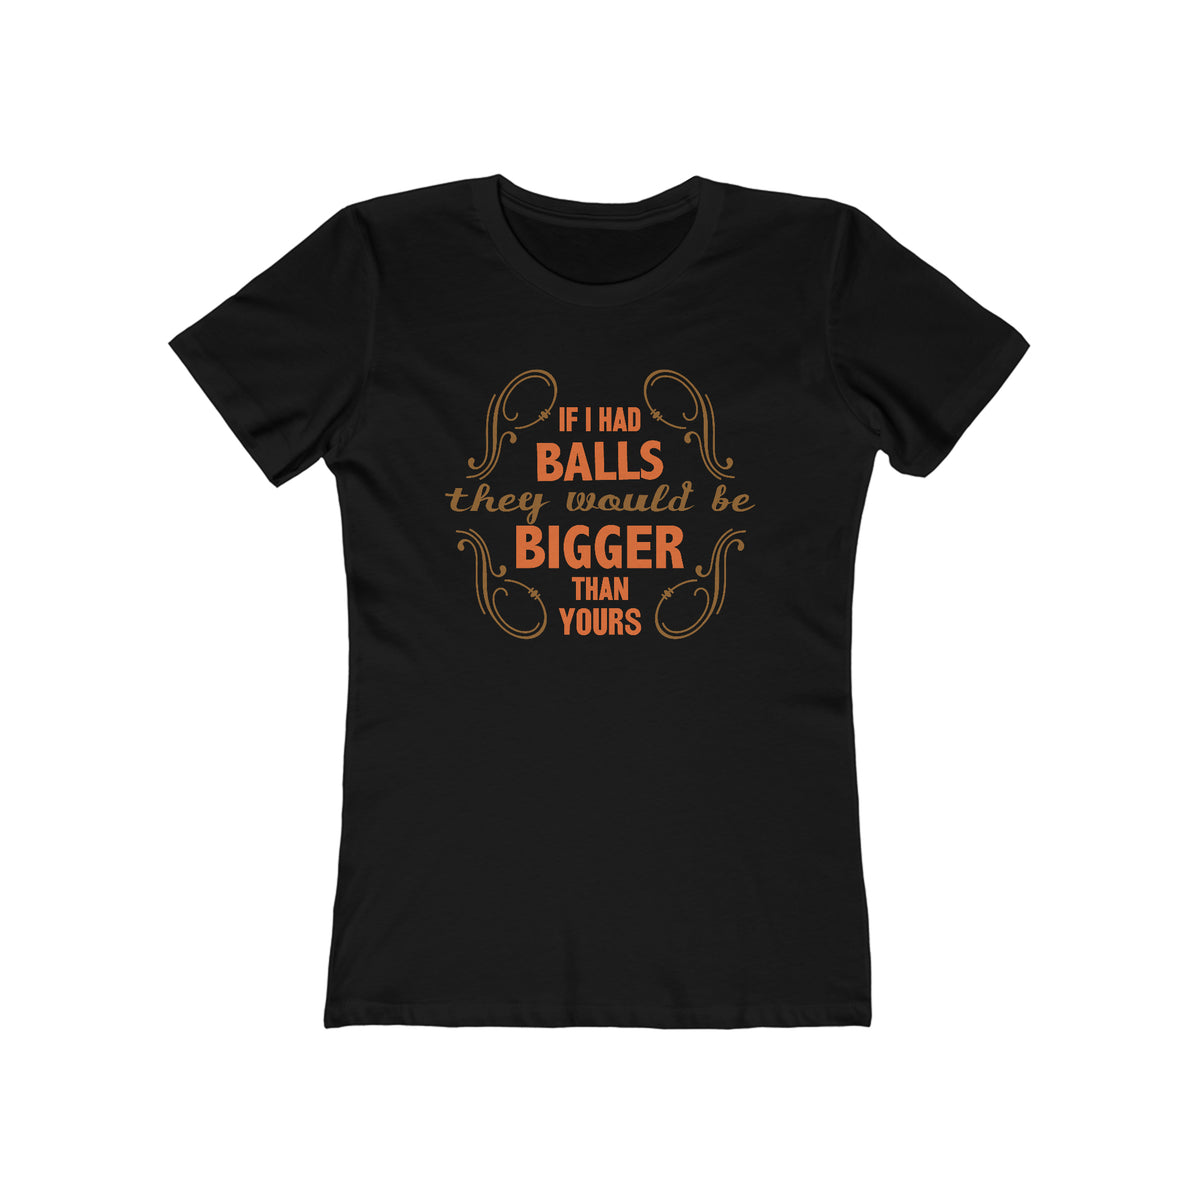 If I Had Balls They Would Be Bigger Than Yours - Women’s T-Shirt